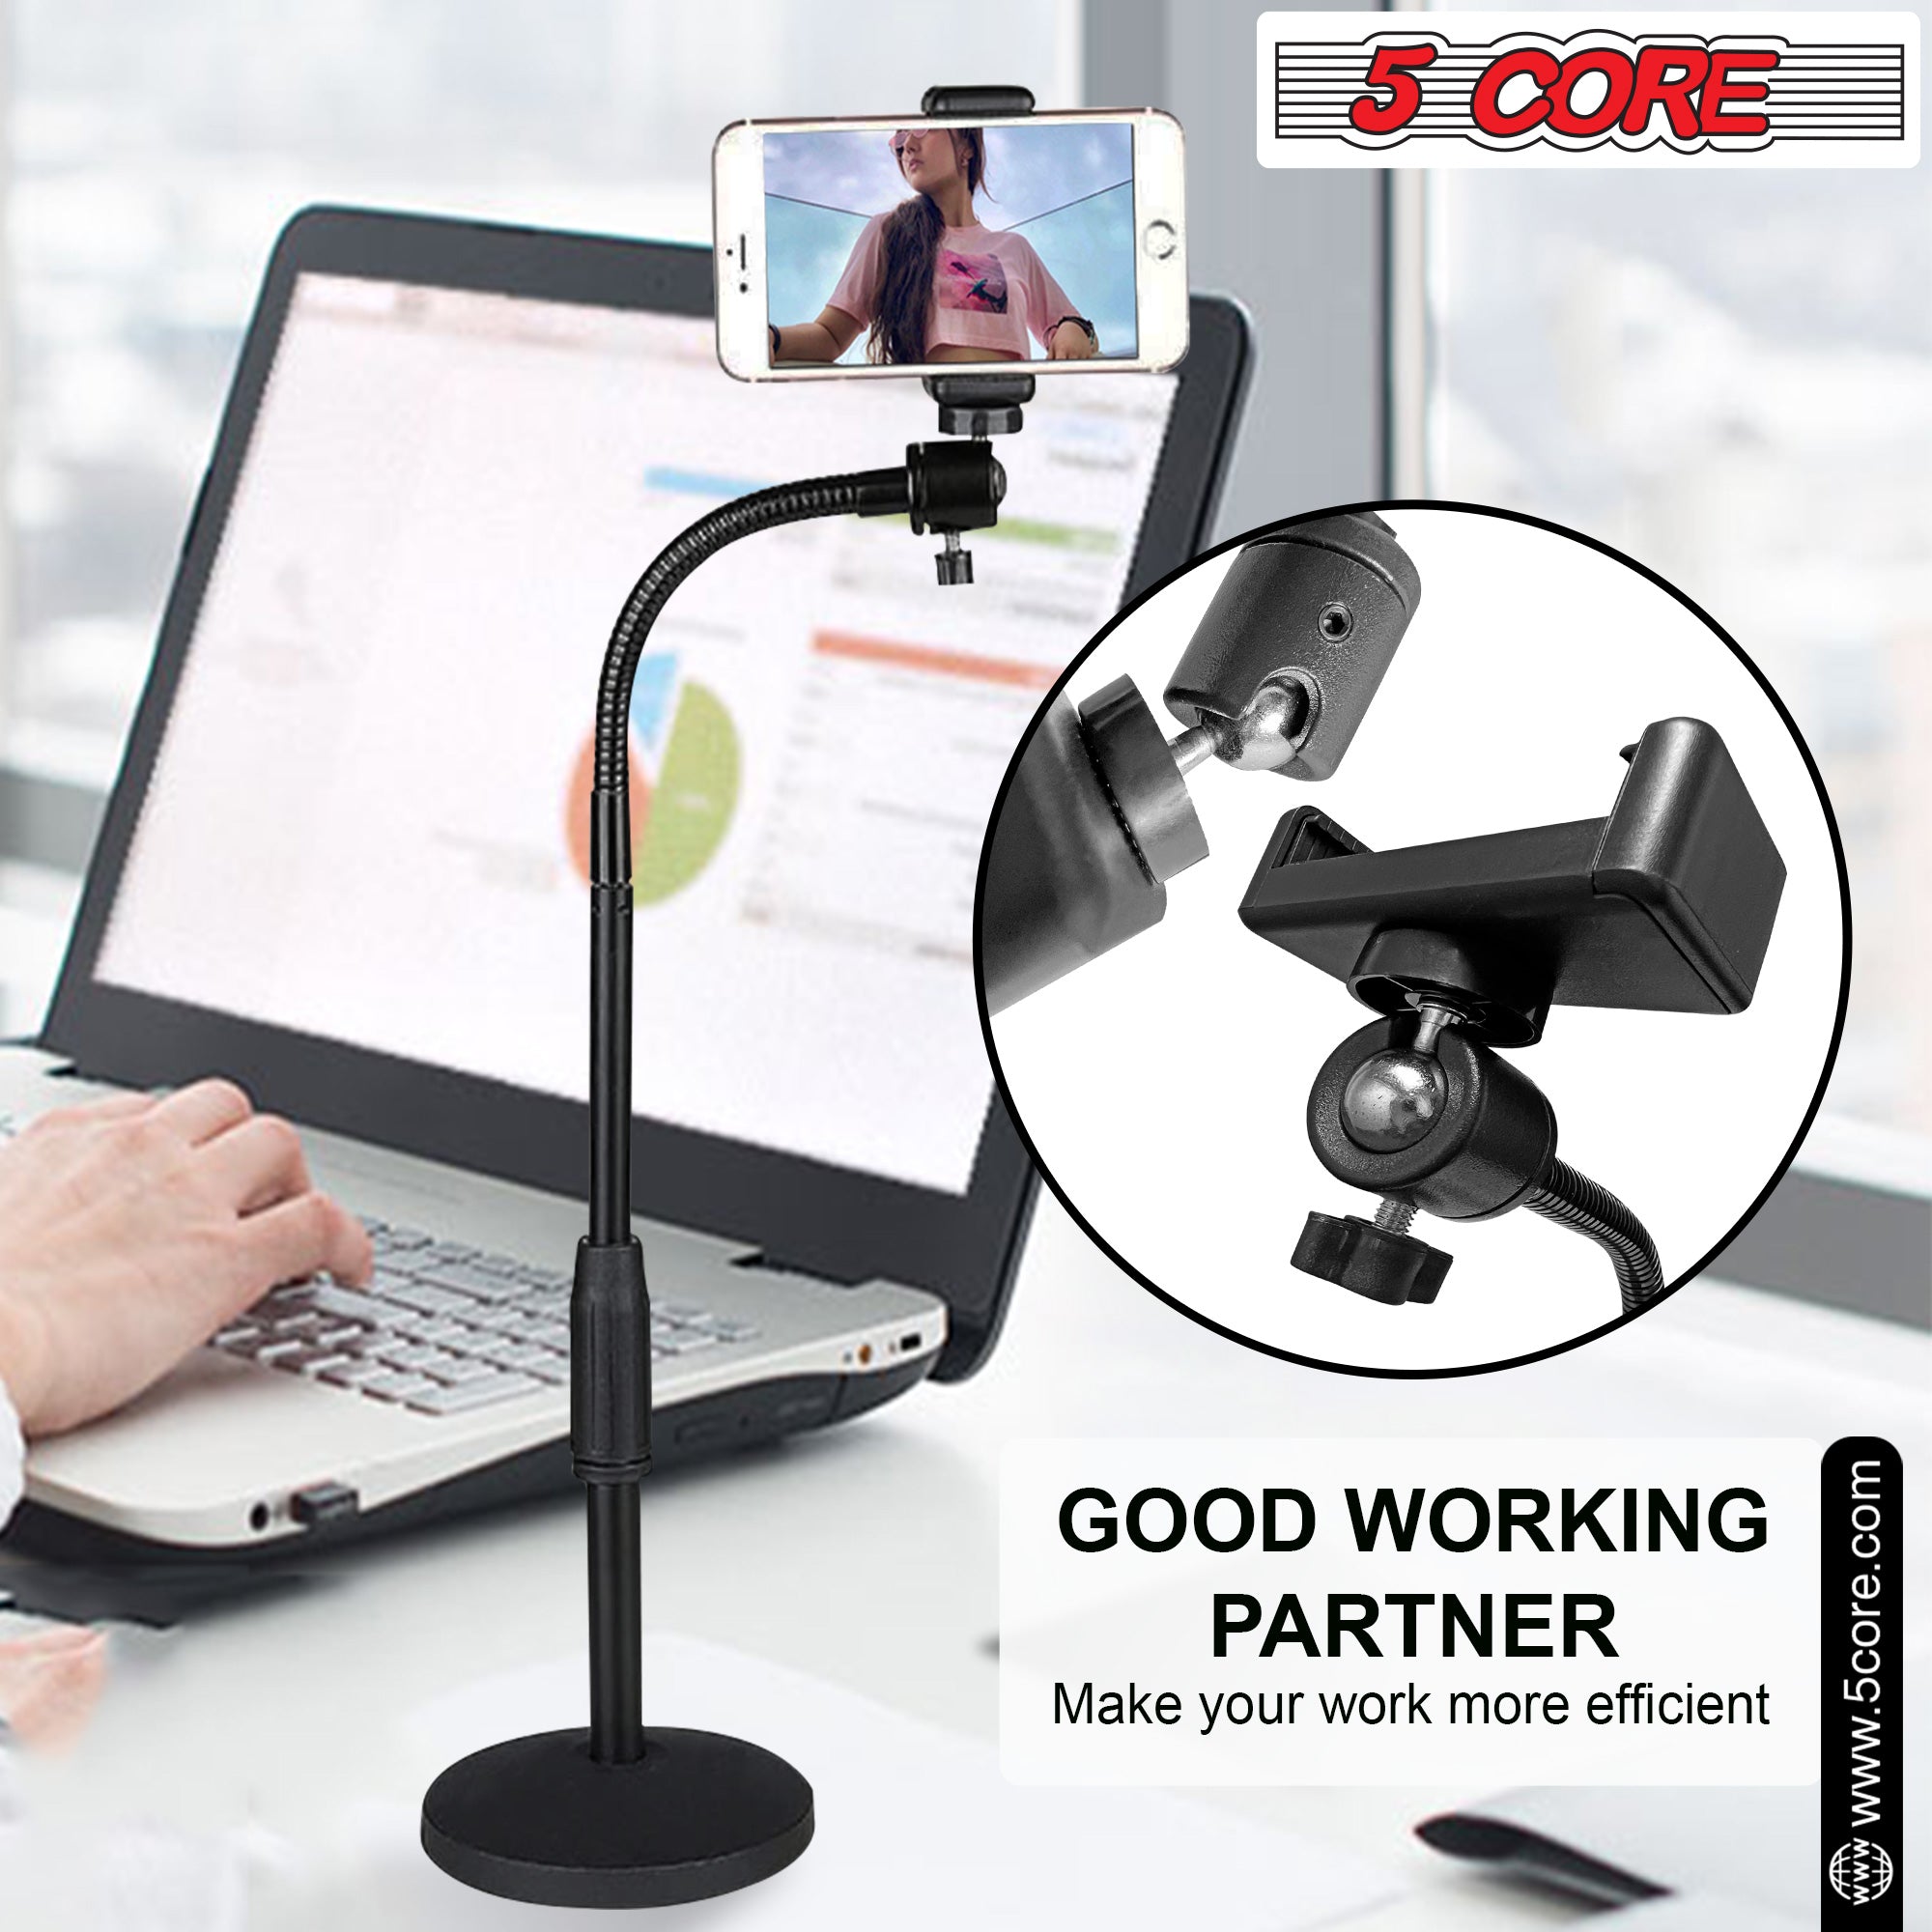 5 Core Cell Phone Stand for Desk Adjustable Scissor Boom Arm Flexible Universal Tablet Phone Holder